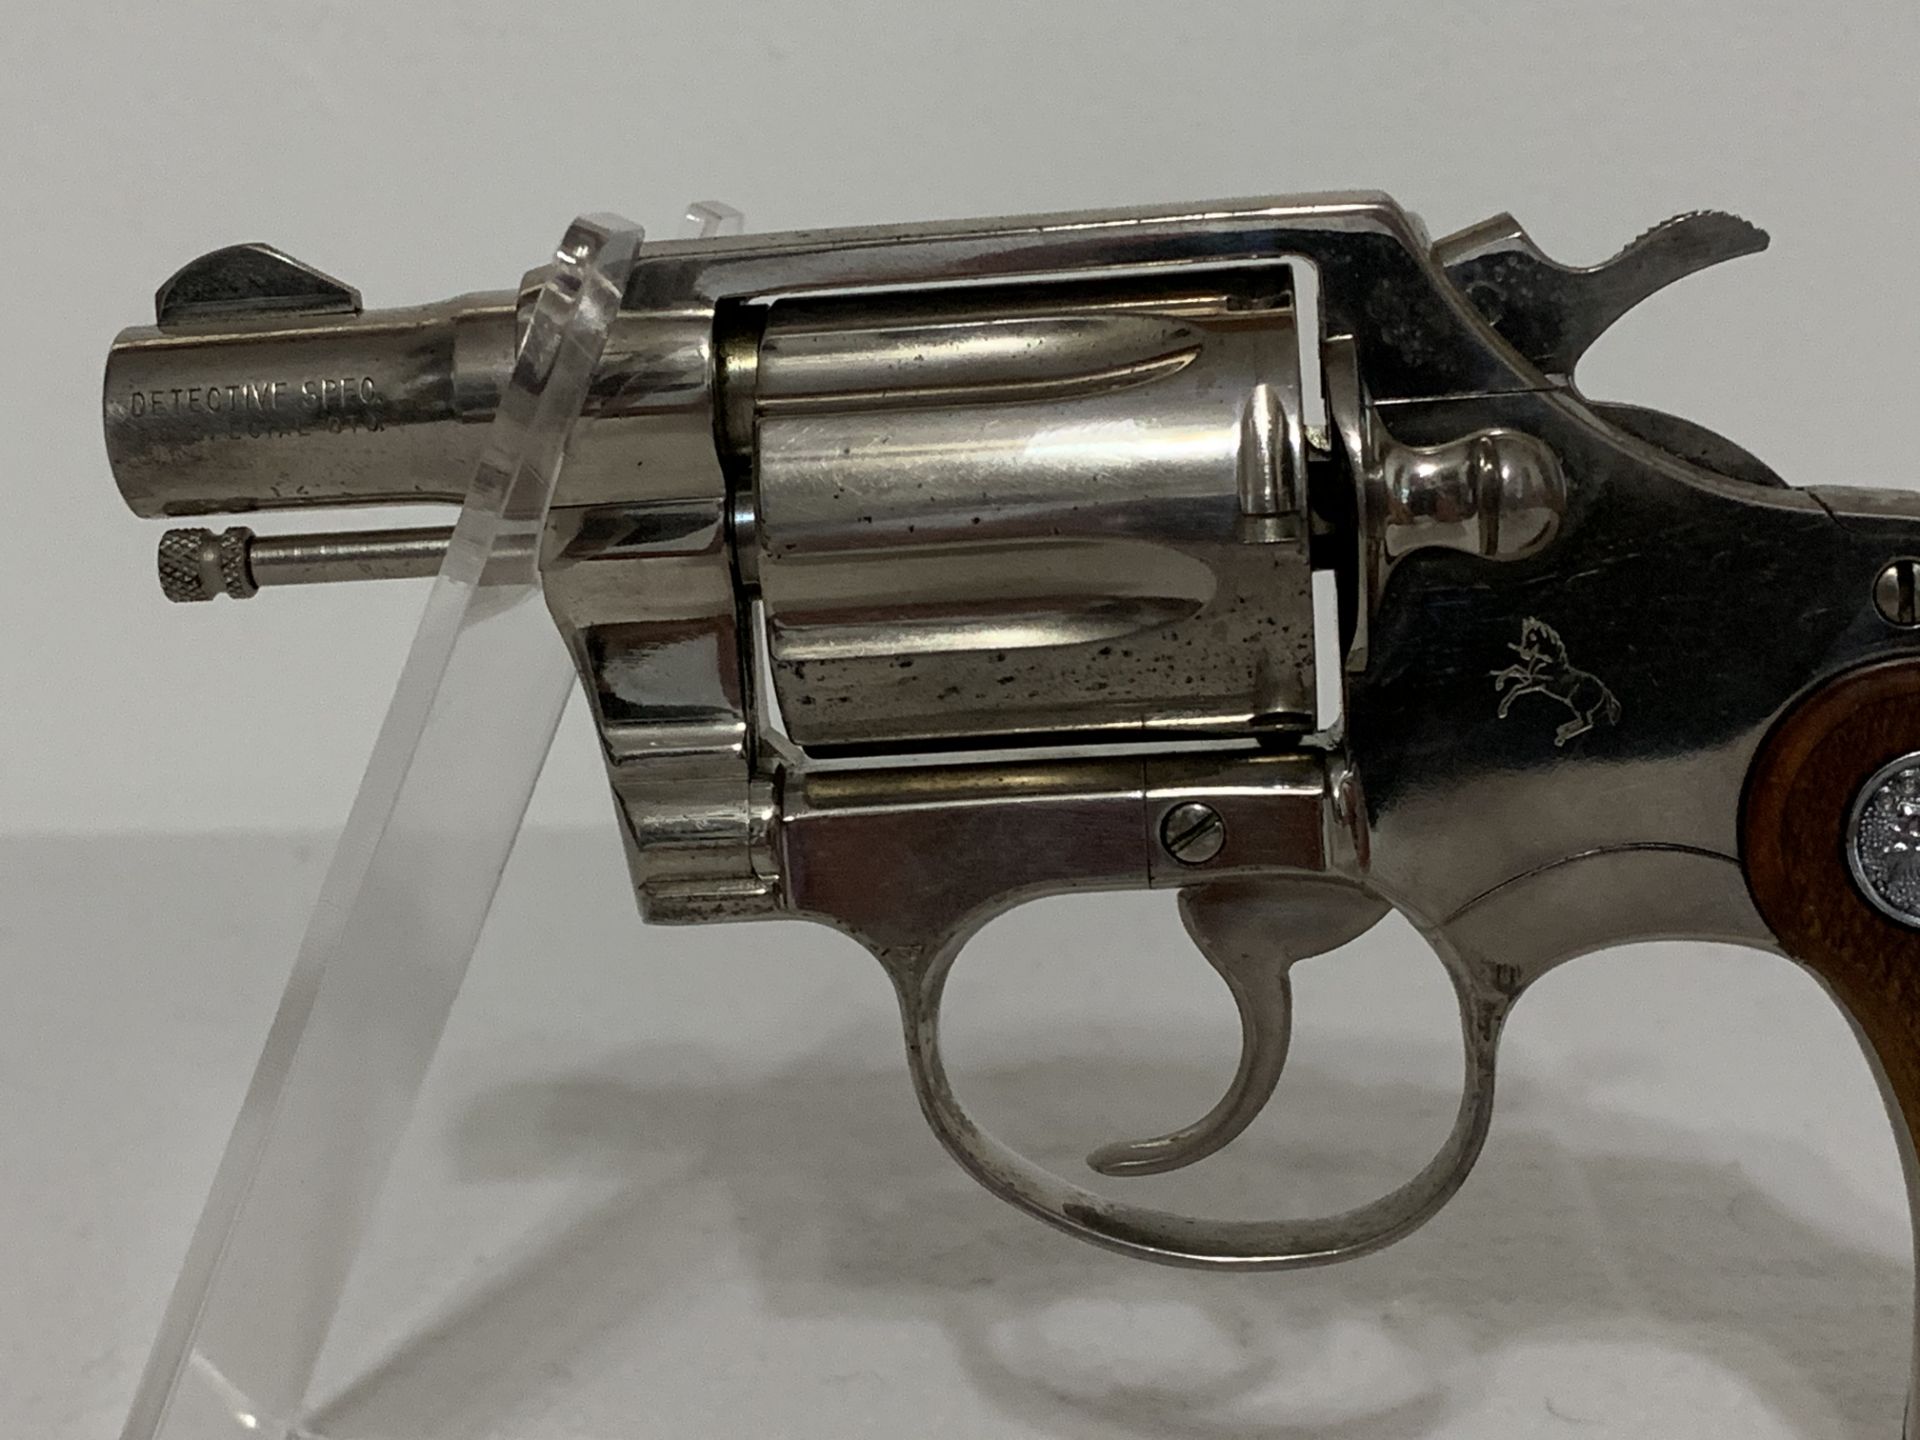 COLT DETECTIVE SPECIAL PISTOL - 38 CAL - NICKEL - WITH ORIGINAL 1971 GRIPS (FOB HOLLYWOOD, FL) - Image 5 of 11